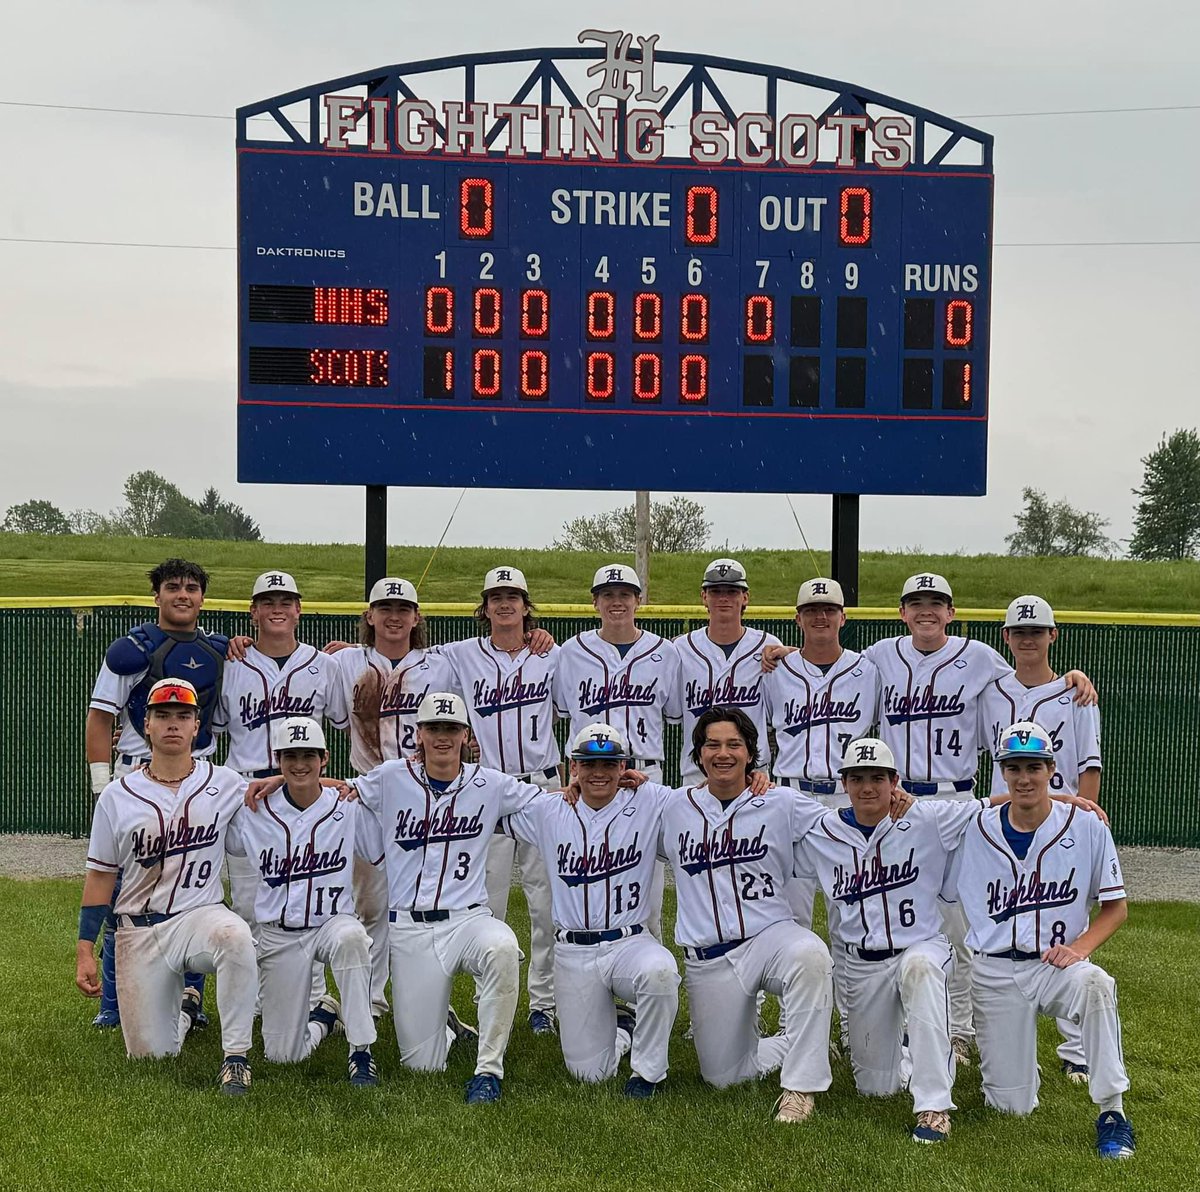 Tournament Game Day!

Varsity @HHScotsBaseball HOME VS Madison Plains
⏱️5:00 pm
 🎟️Tickets are $8 for adults & $5 for students. Tickets may be purchased at the game or online at ohsaa.org/tickets
#GoScots @CBUSsportsLocal @SportsMCS @McMotorsport @hlsdsports @swankonsports